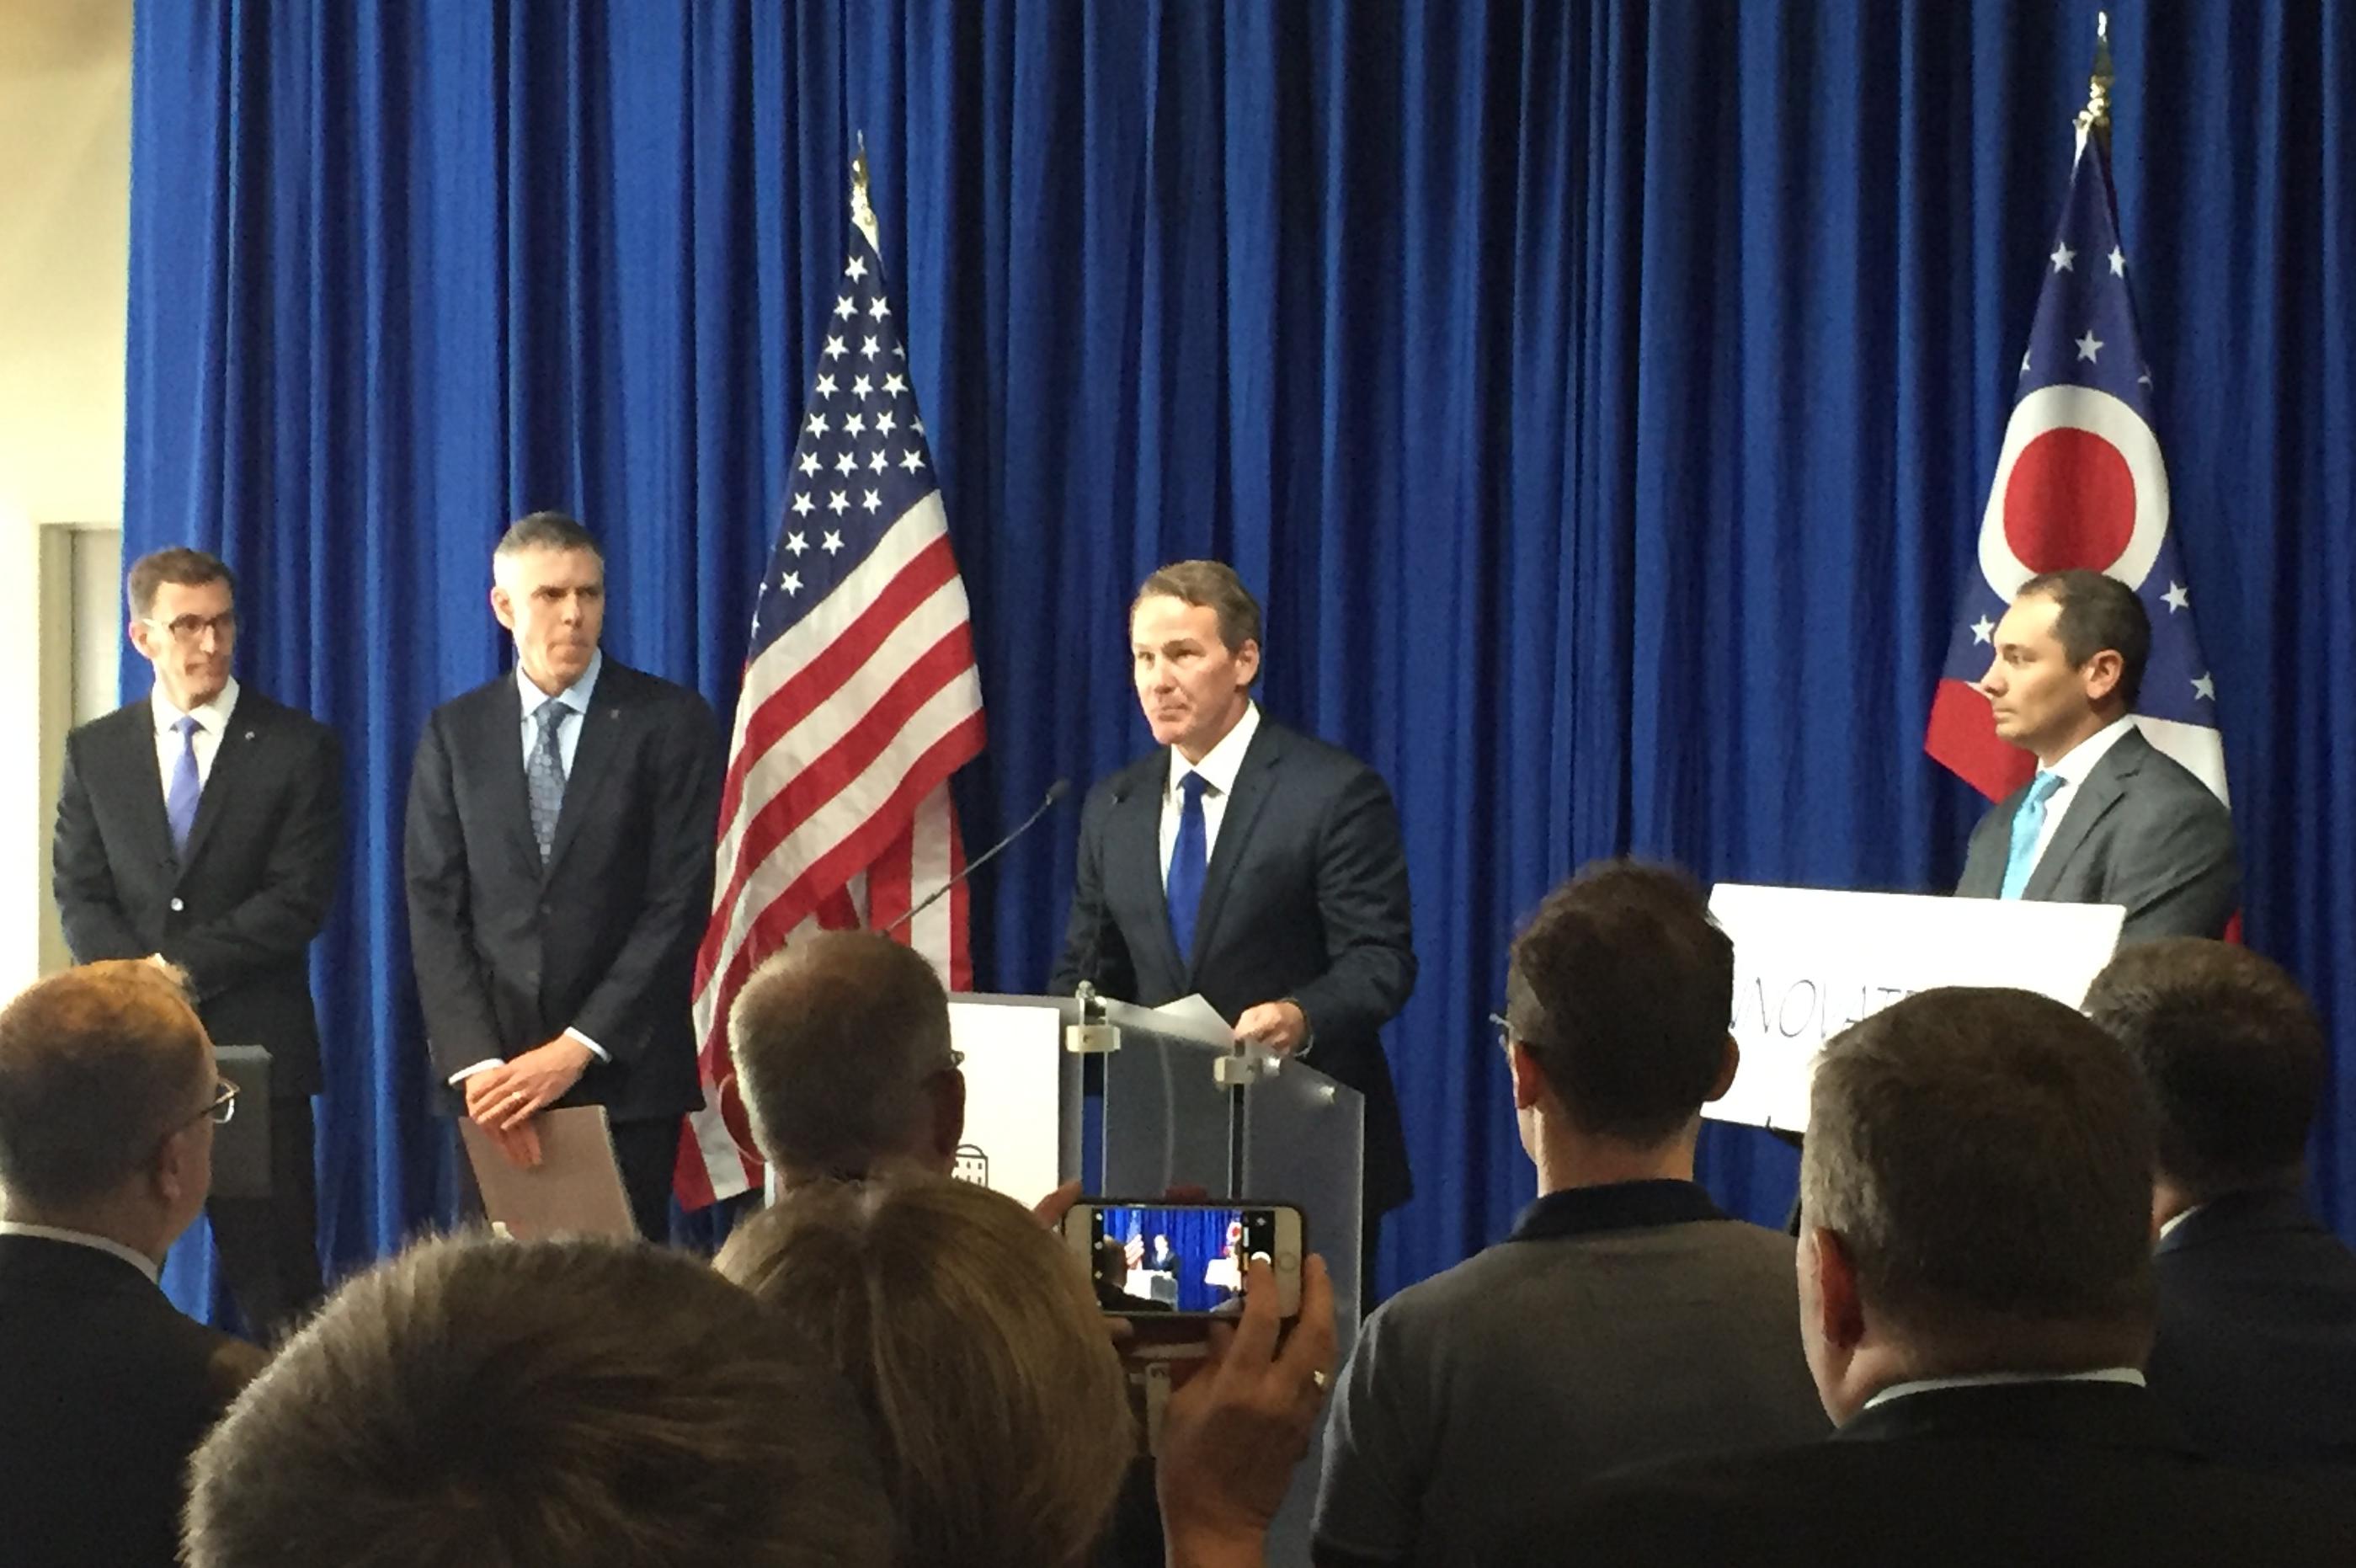 Lt. Gov. Jon Husted is flanked by Ohio's State's associate vice president of technology commercialization Kevin Taylor and others as he announces the Ohio IP Promise.